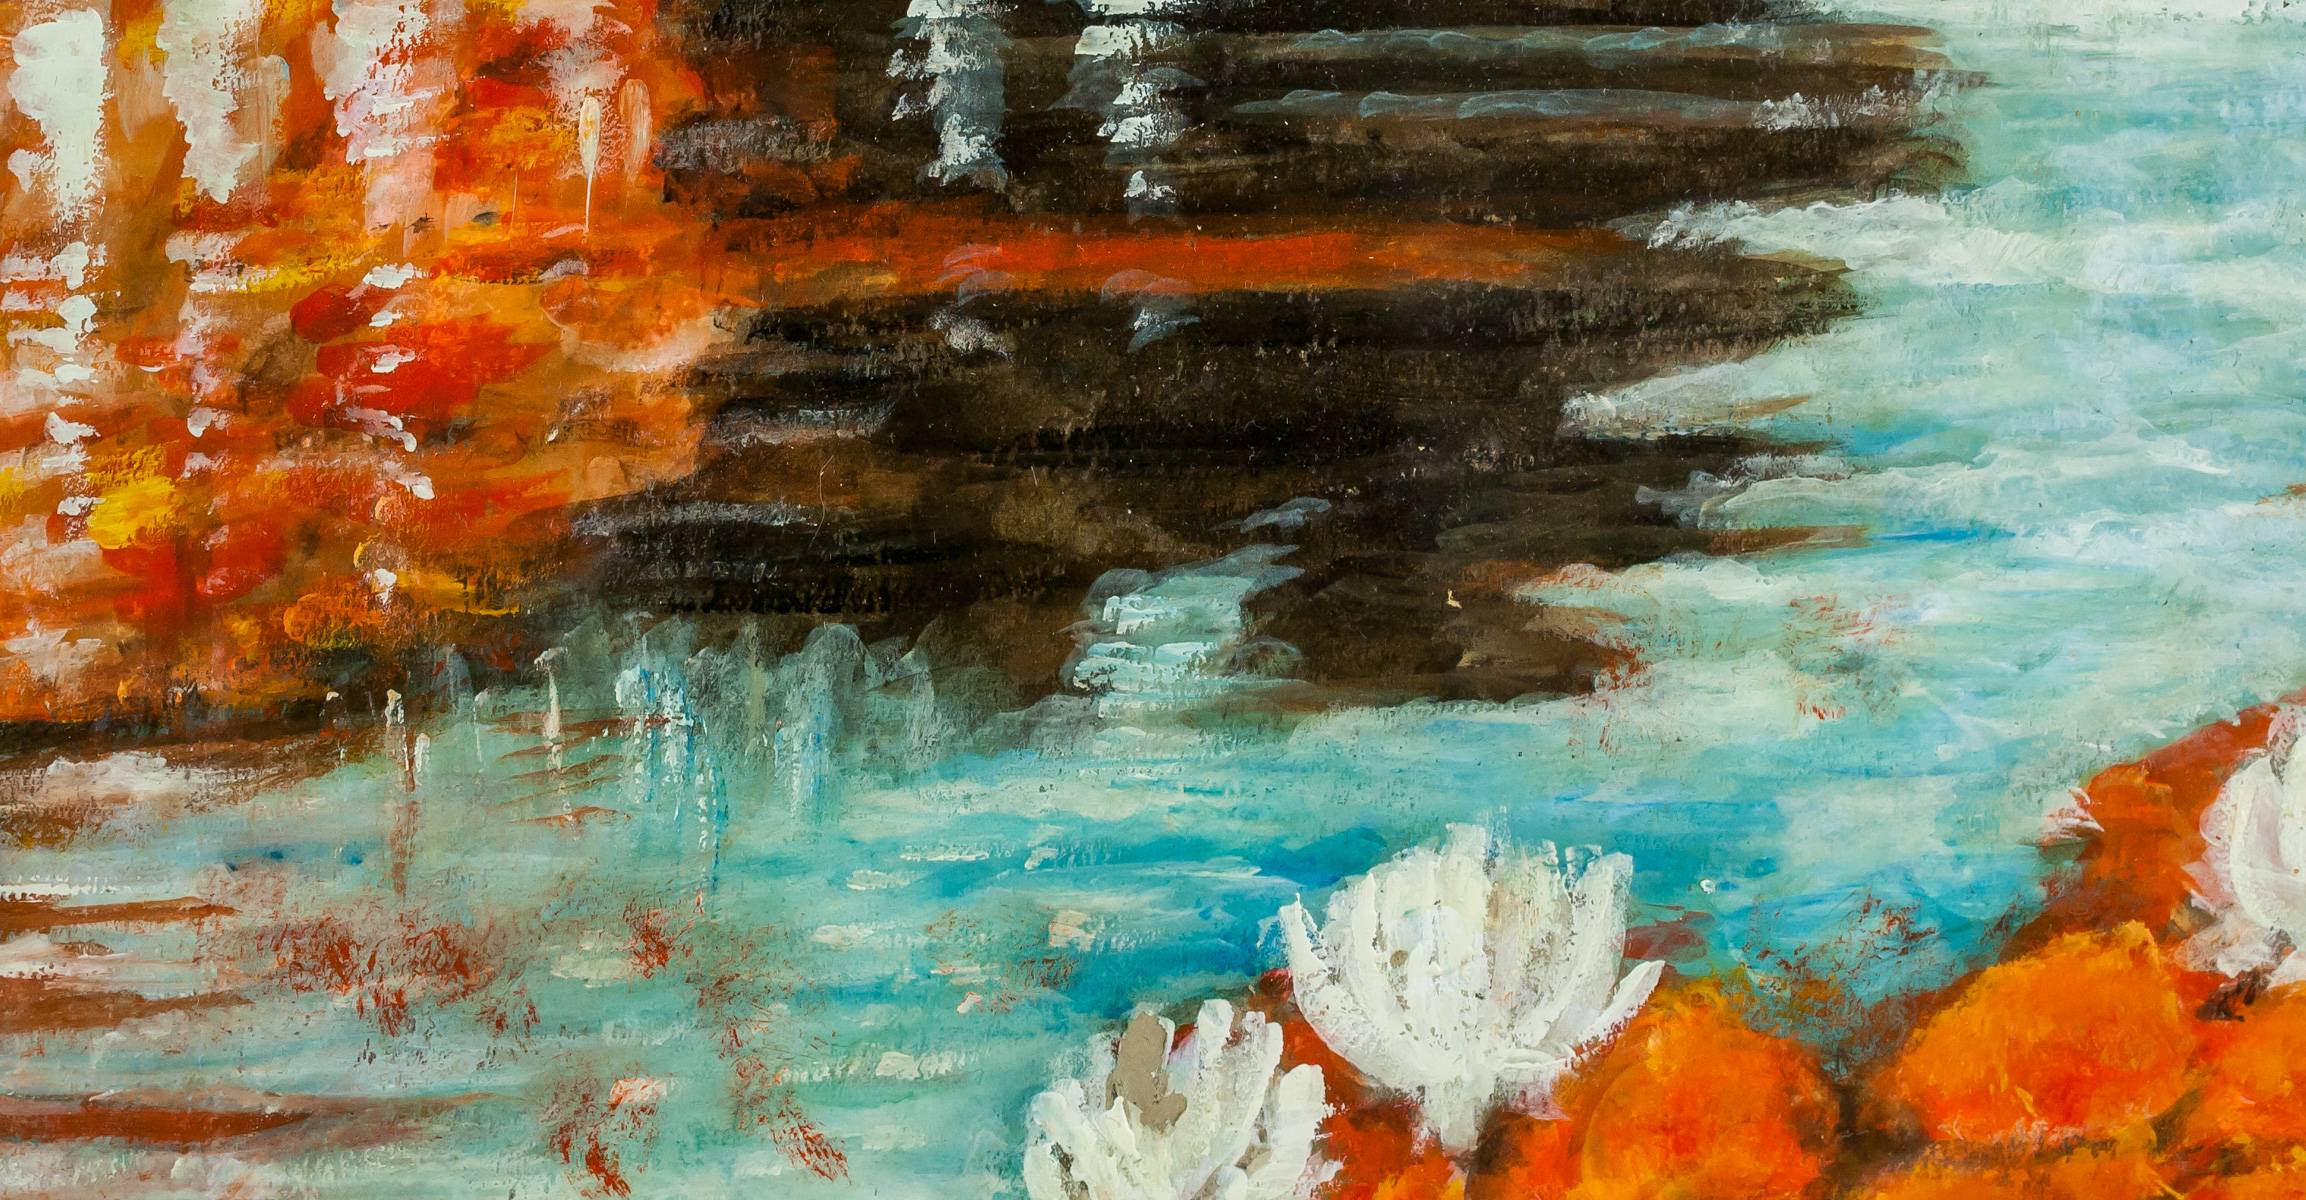 Oil on paper. Featuring an impressionist landscape scene of a reflective pond and lillies. Signed Claude Monet on the lower left corner. Inscribed C. Monet n. 9135 / Les ny mphiis / paysage, 1906 on verso. A label affixed to verso inscribed Monet 230. Attributed to Claude Monet (1840-1926, French). 25 x 33 cm (9.8 x 13.0 inches). PROVENANCE: Private American collection